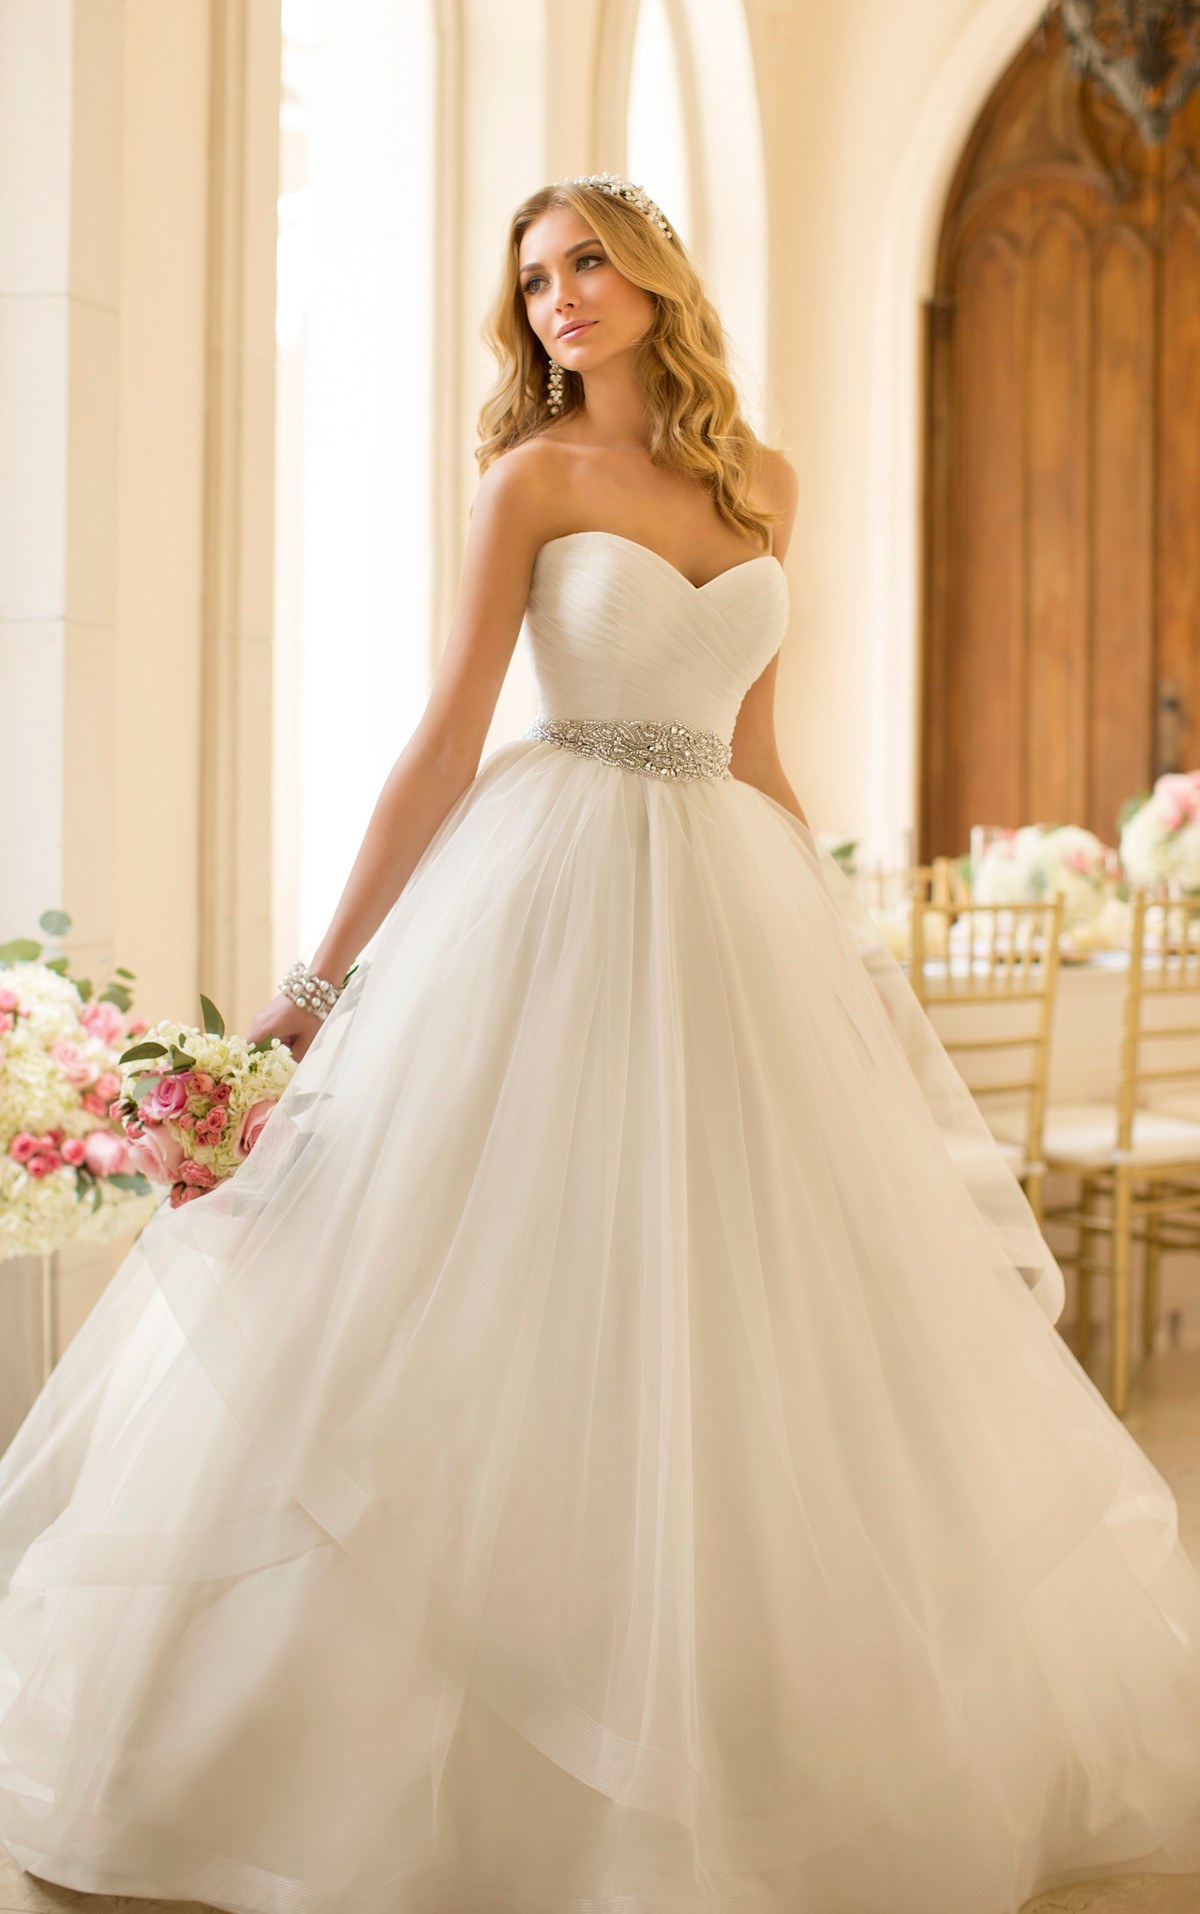 Popular Wedding Dresses
 The Best Gowns from The Most In Demand Wedding Dress